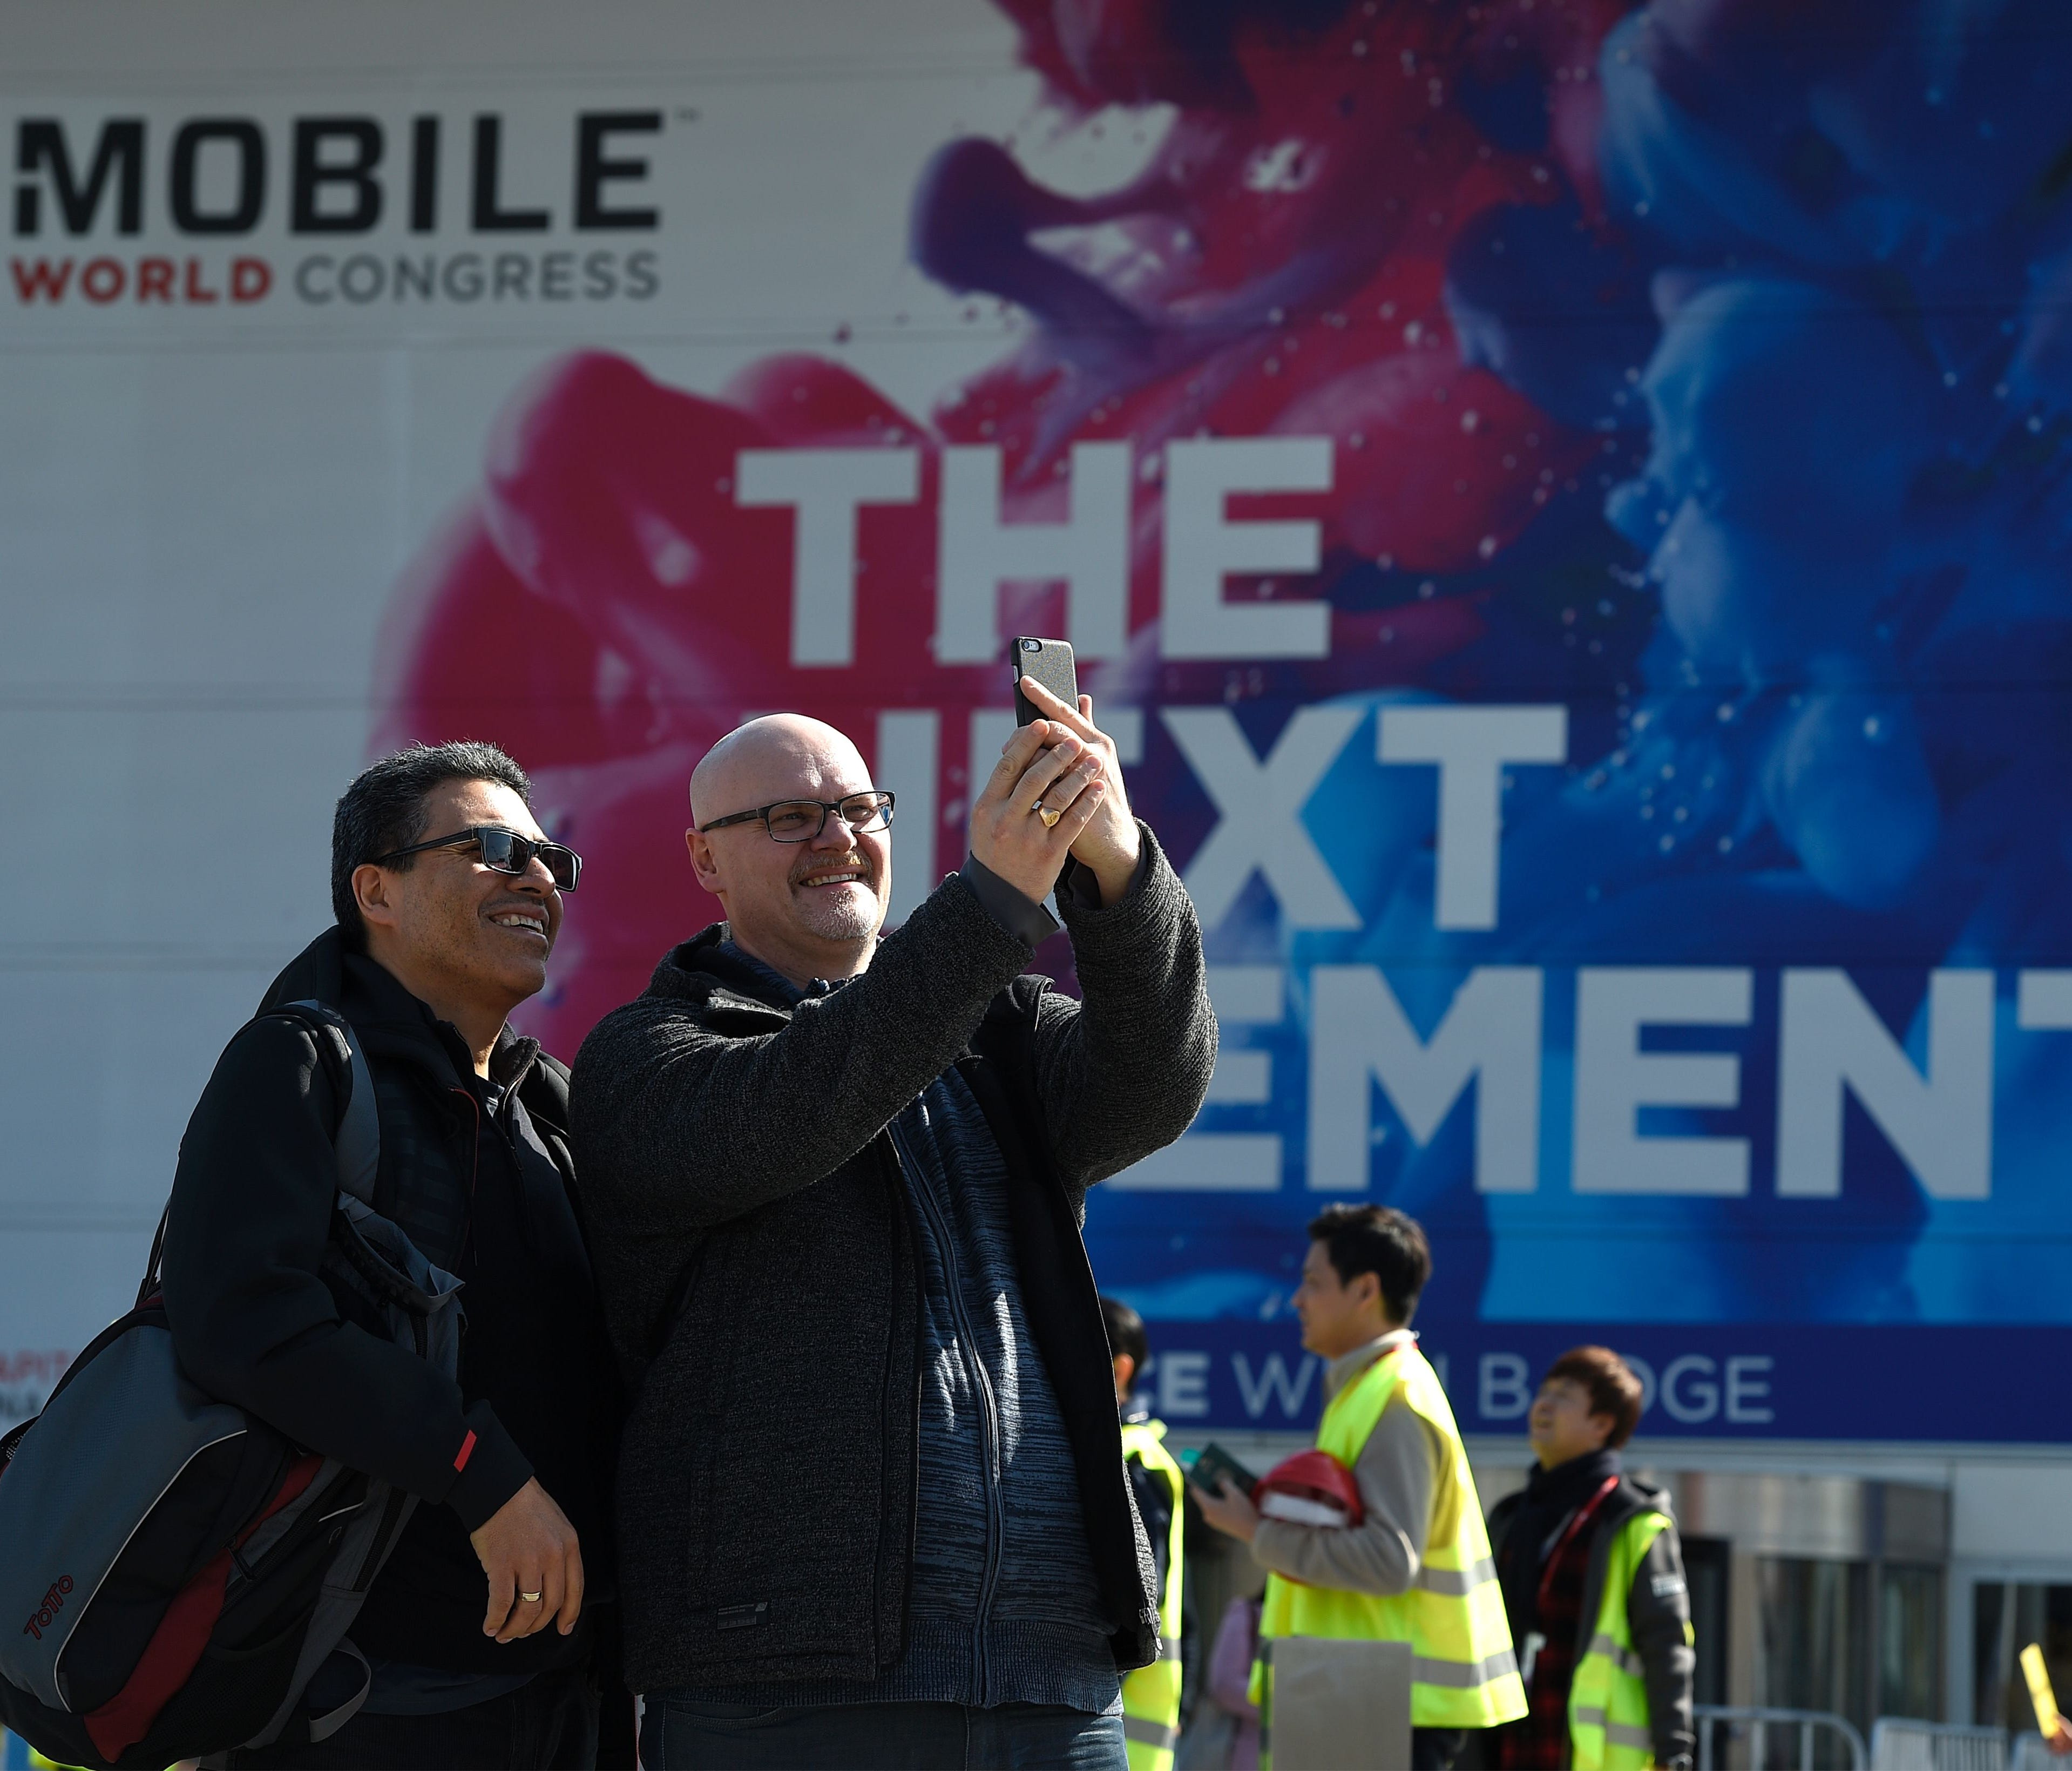 People take selfies outside the Mobile World Congress in Barcelona on Feb. 25, 2017, before the start of the world's biggest mobile fair, held from Feb. 27 to 2 Mar.